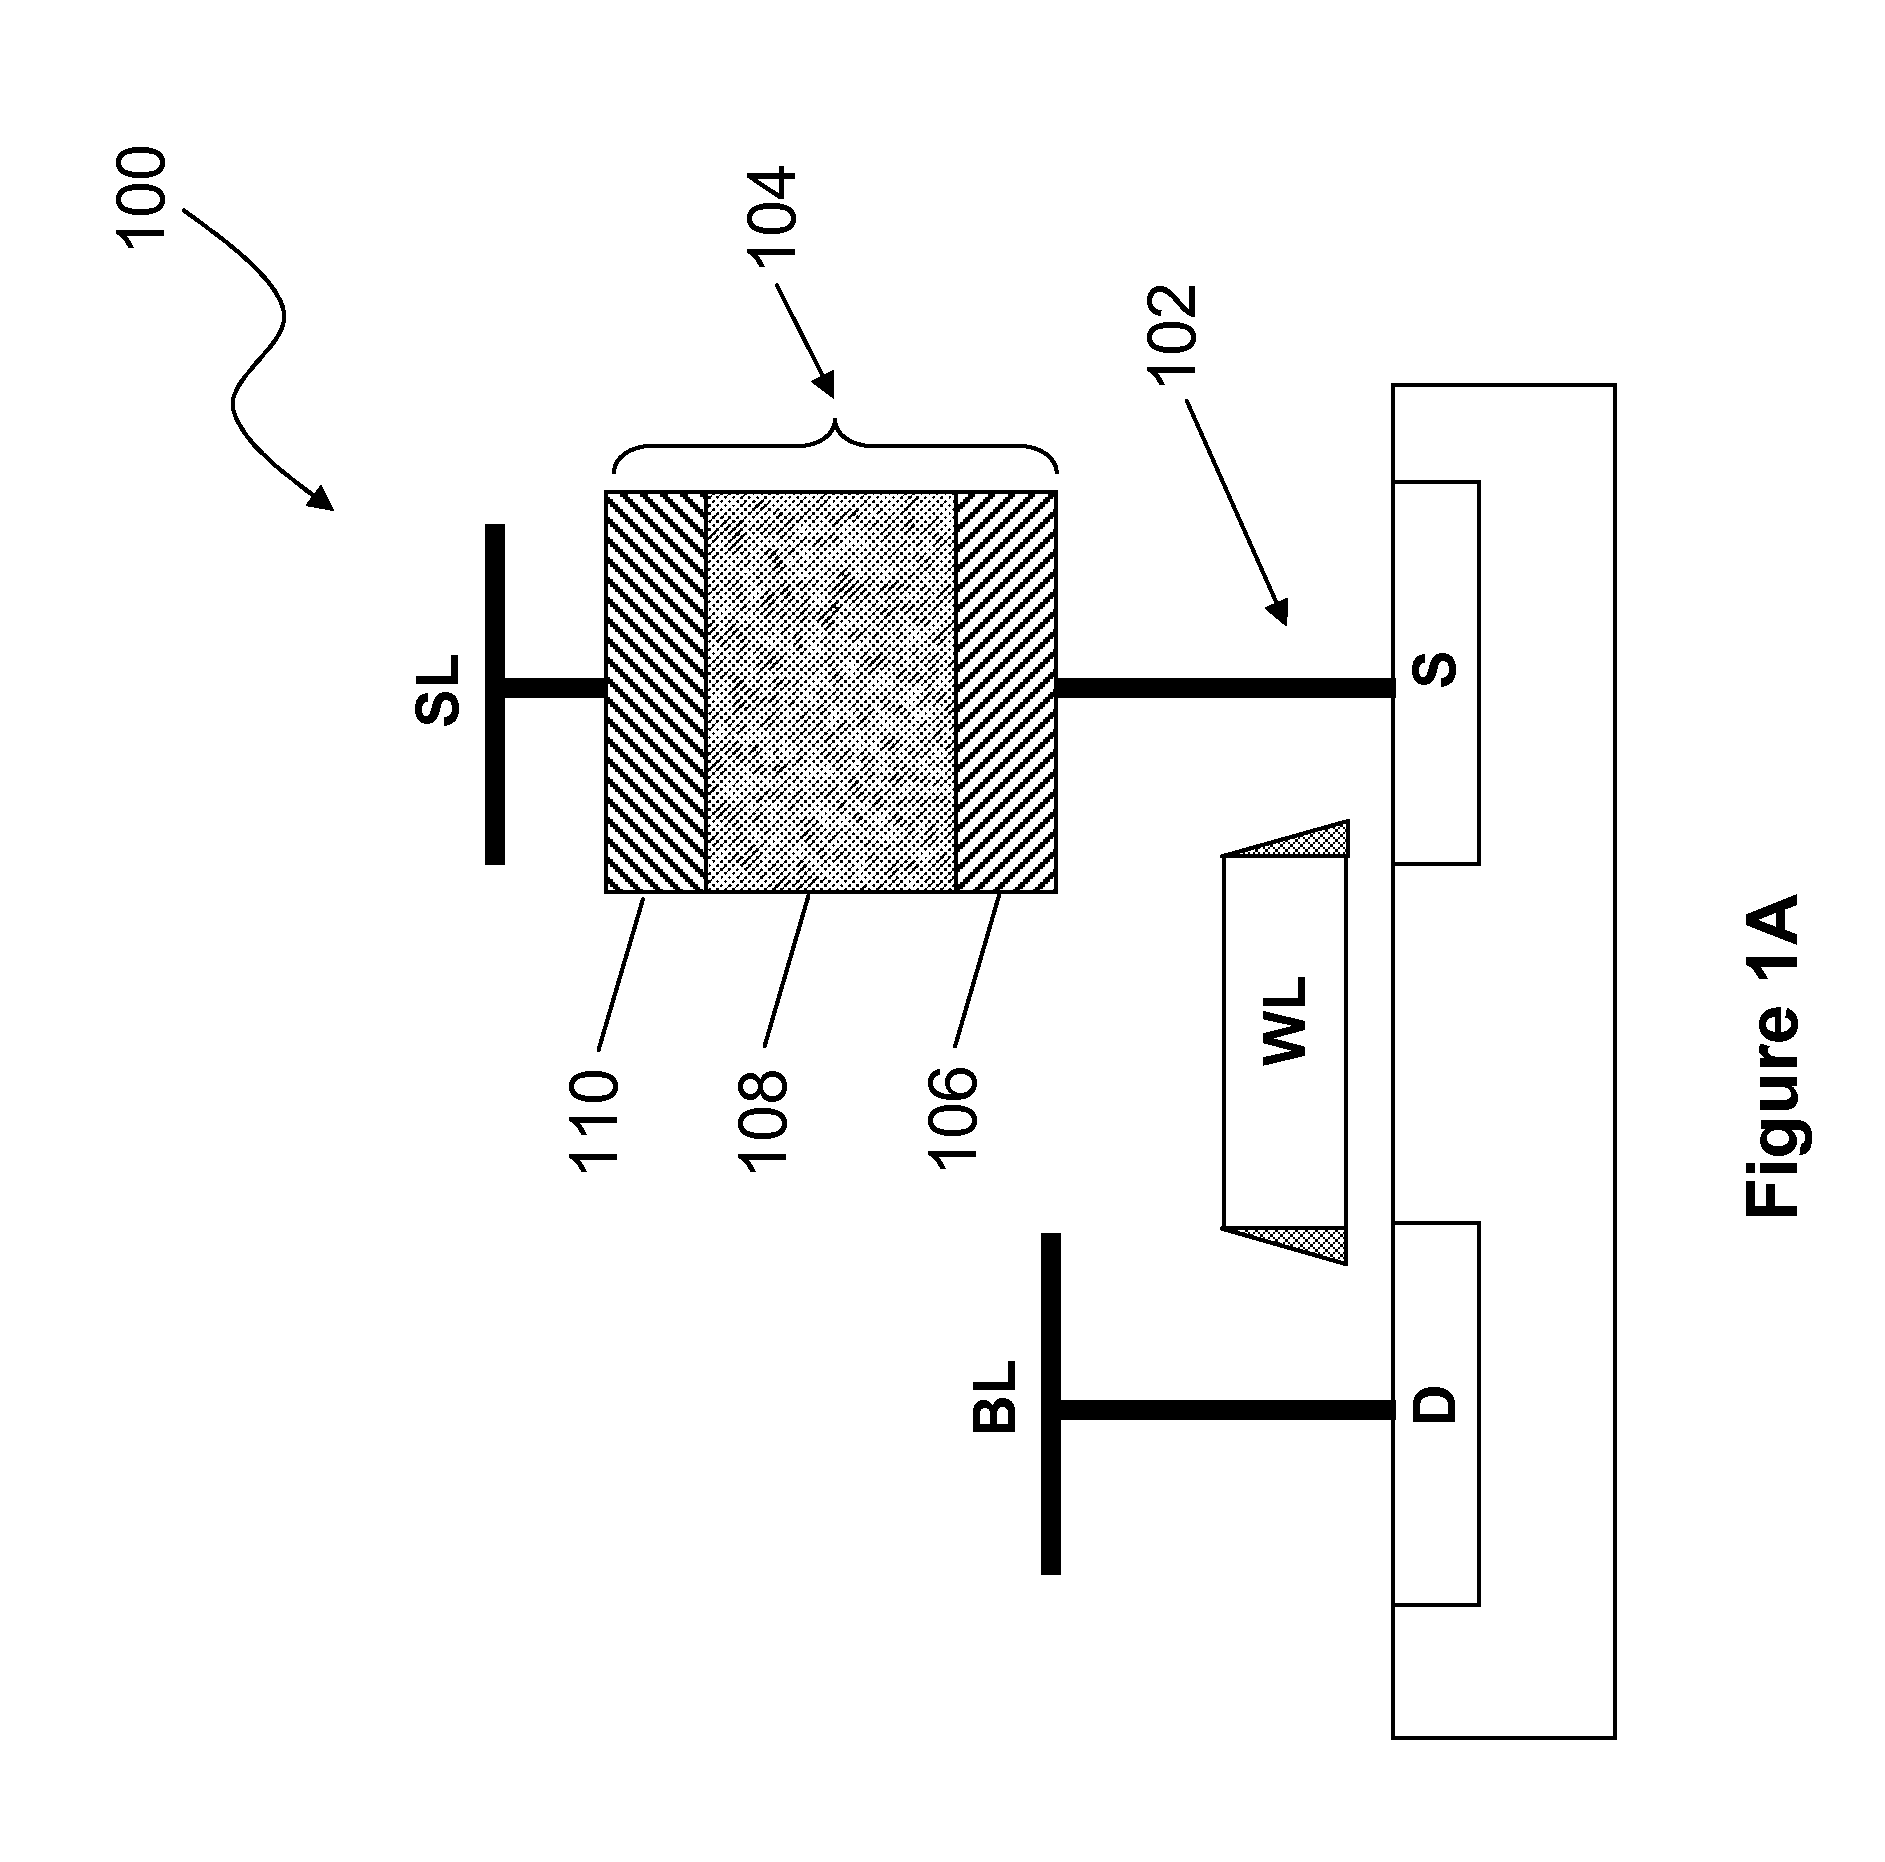 Carbon based nonvolatile cross point memory incorporating carbon based diode select devices and mosfet select devices for memory and logic applications